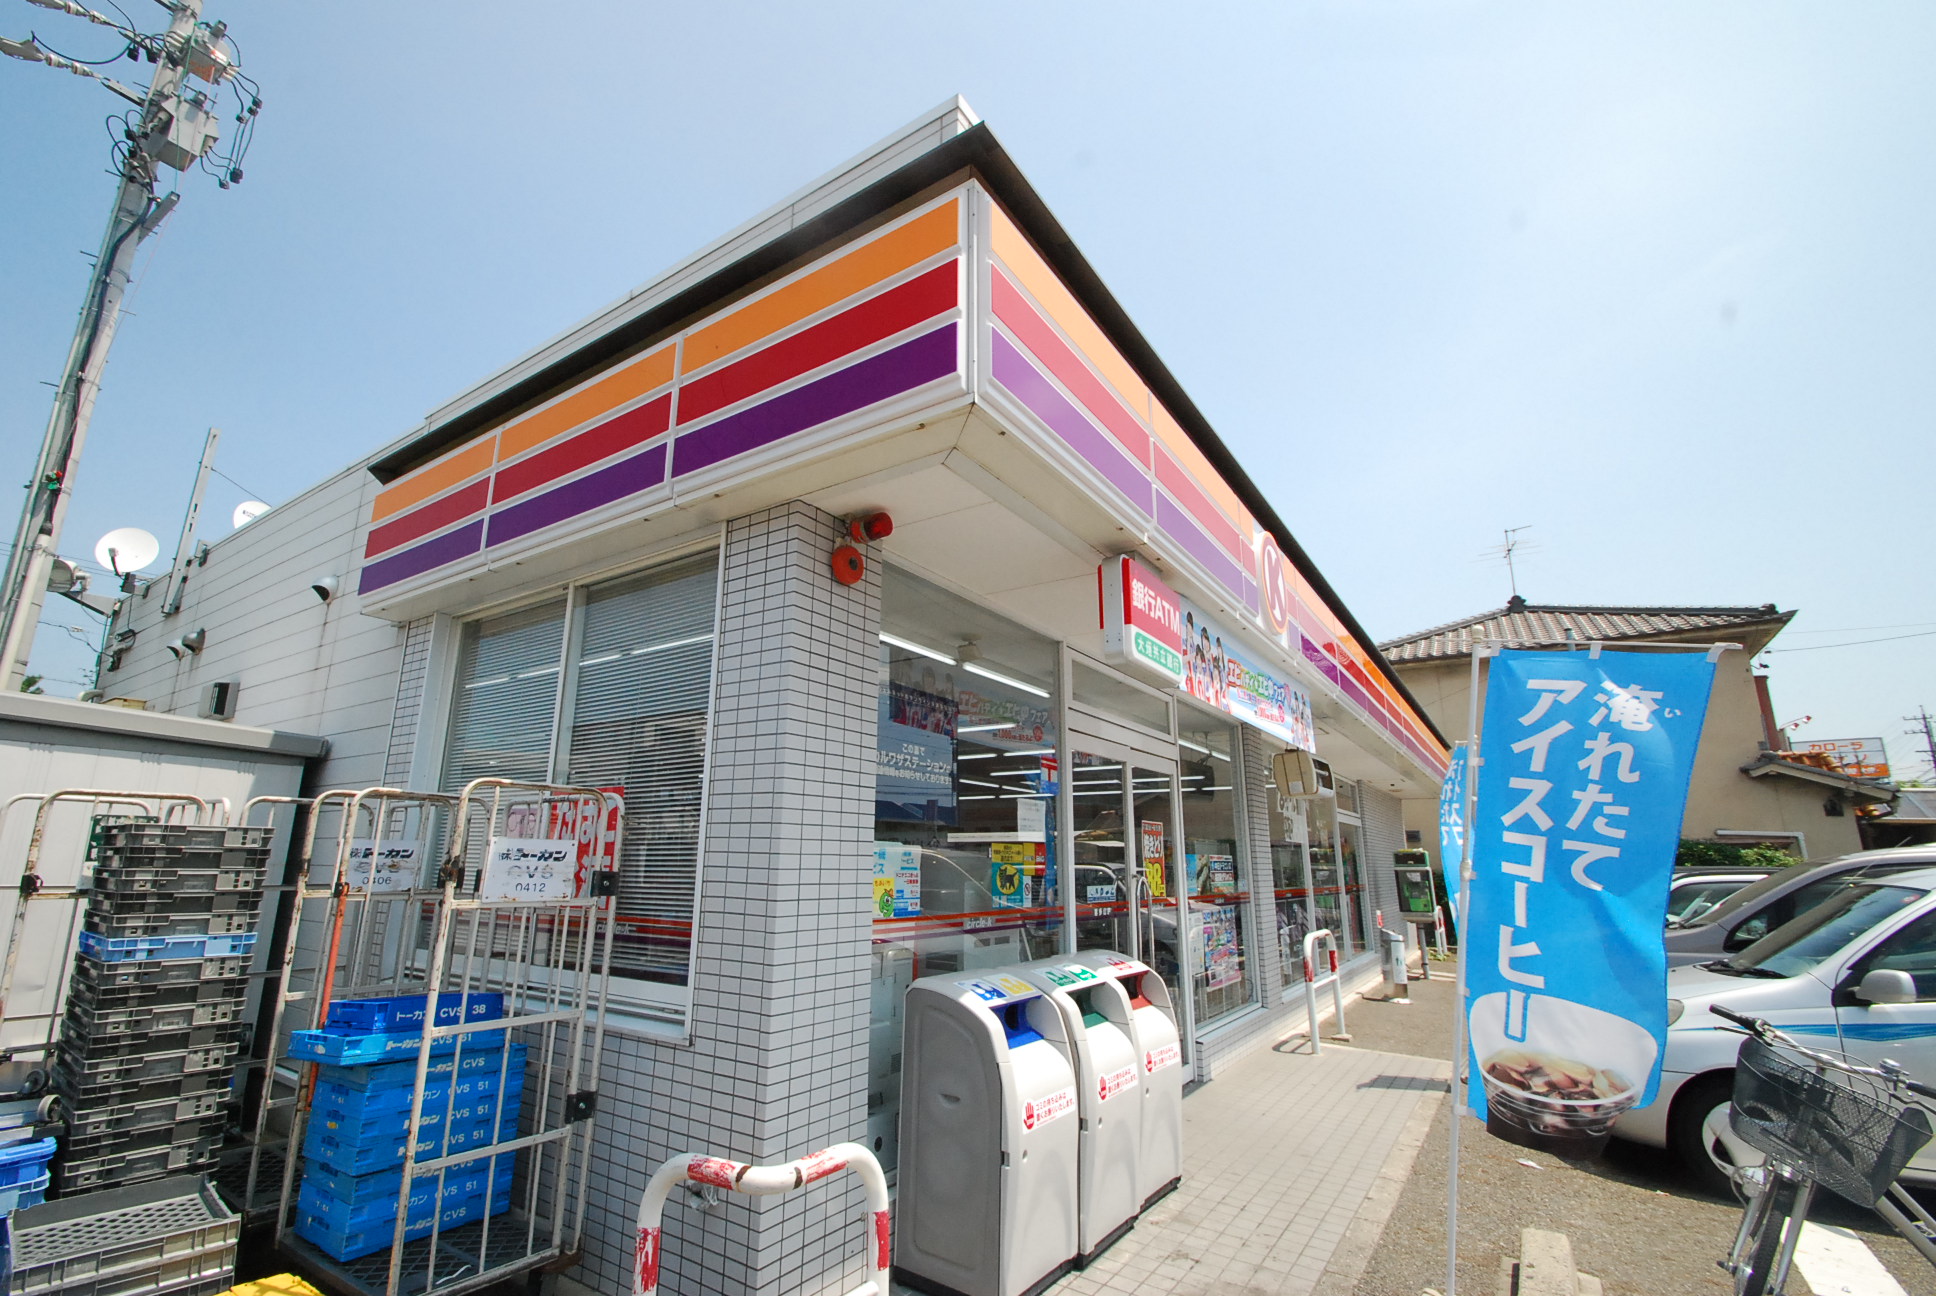 Convenience store. 390m to Circle K Ozone store (convenience store)